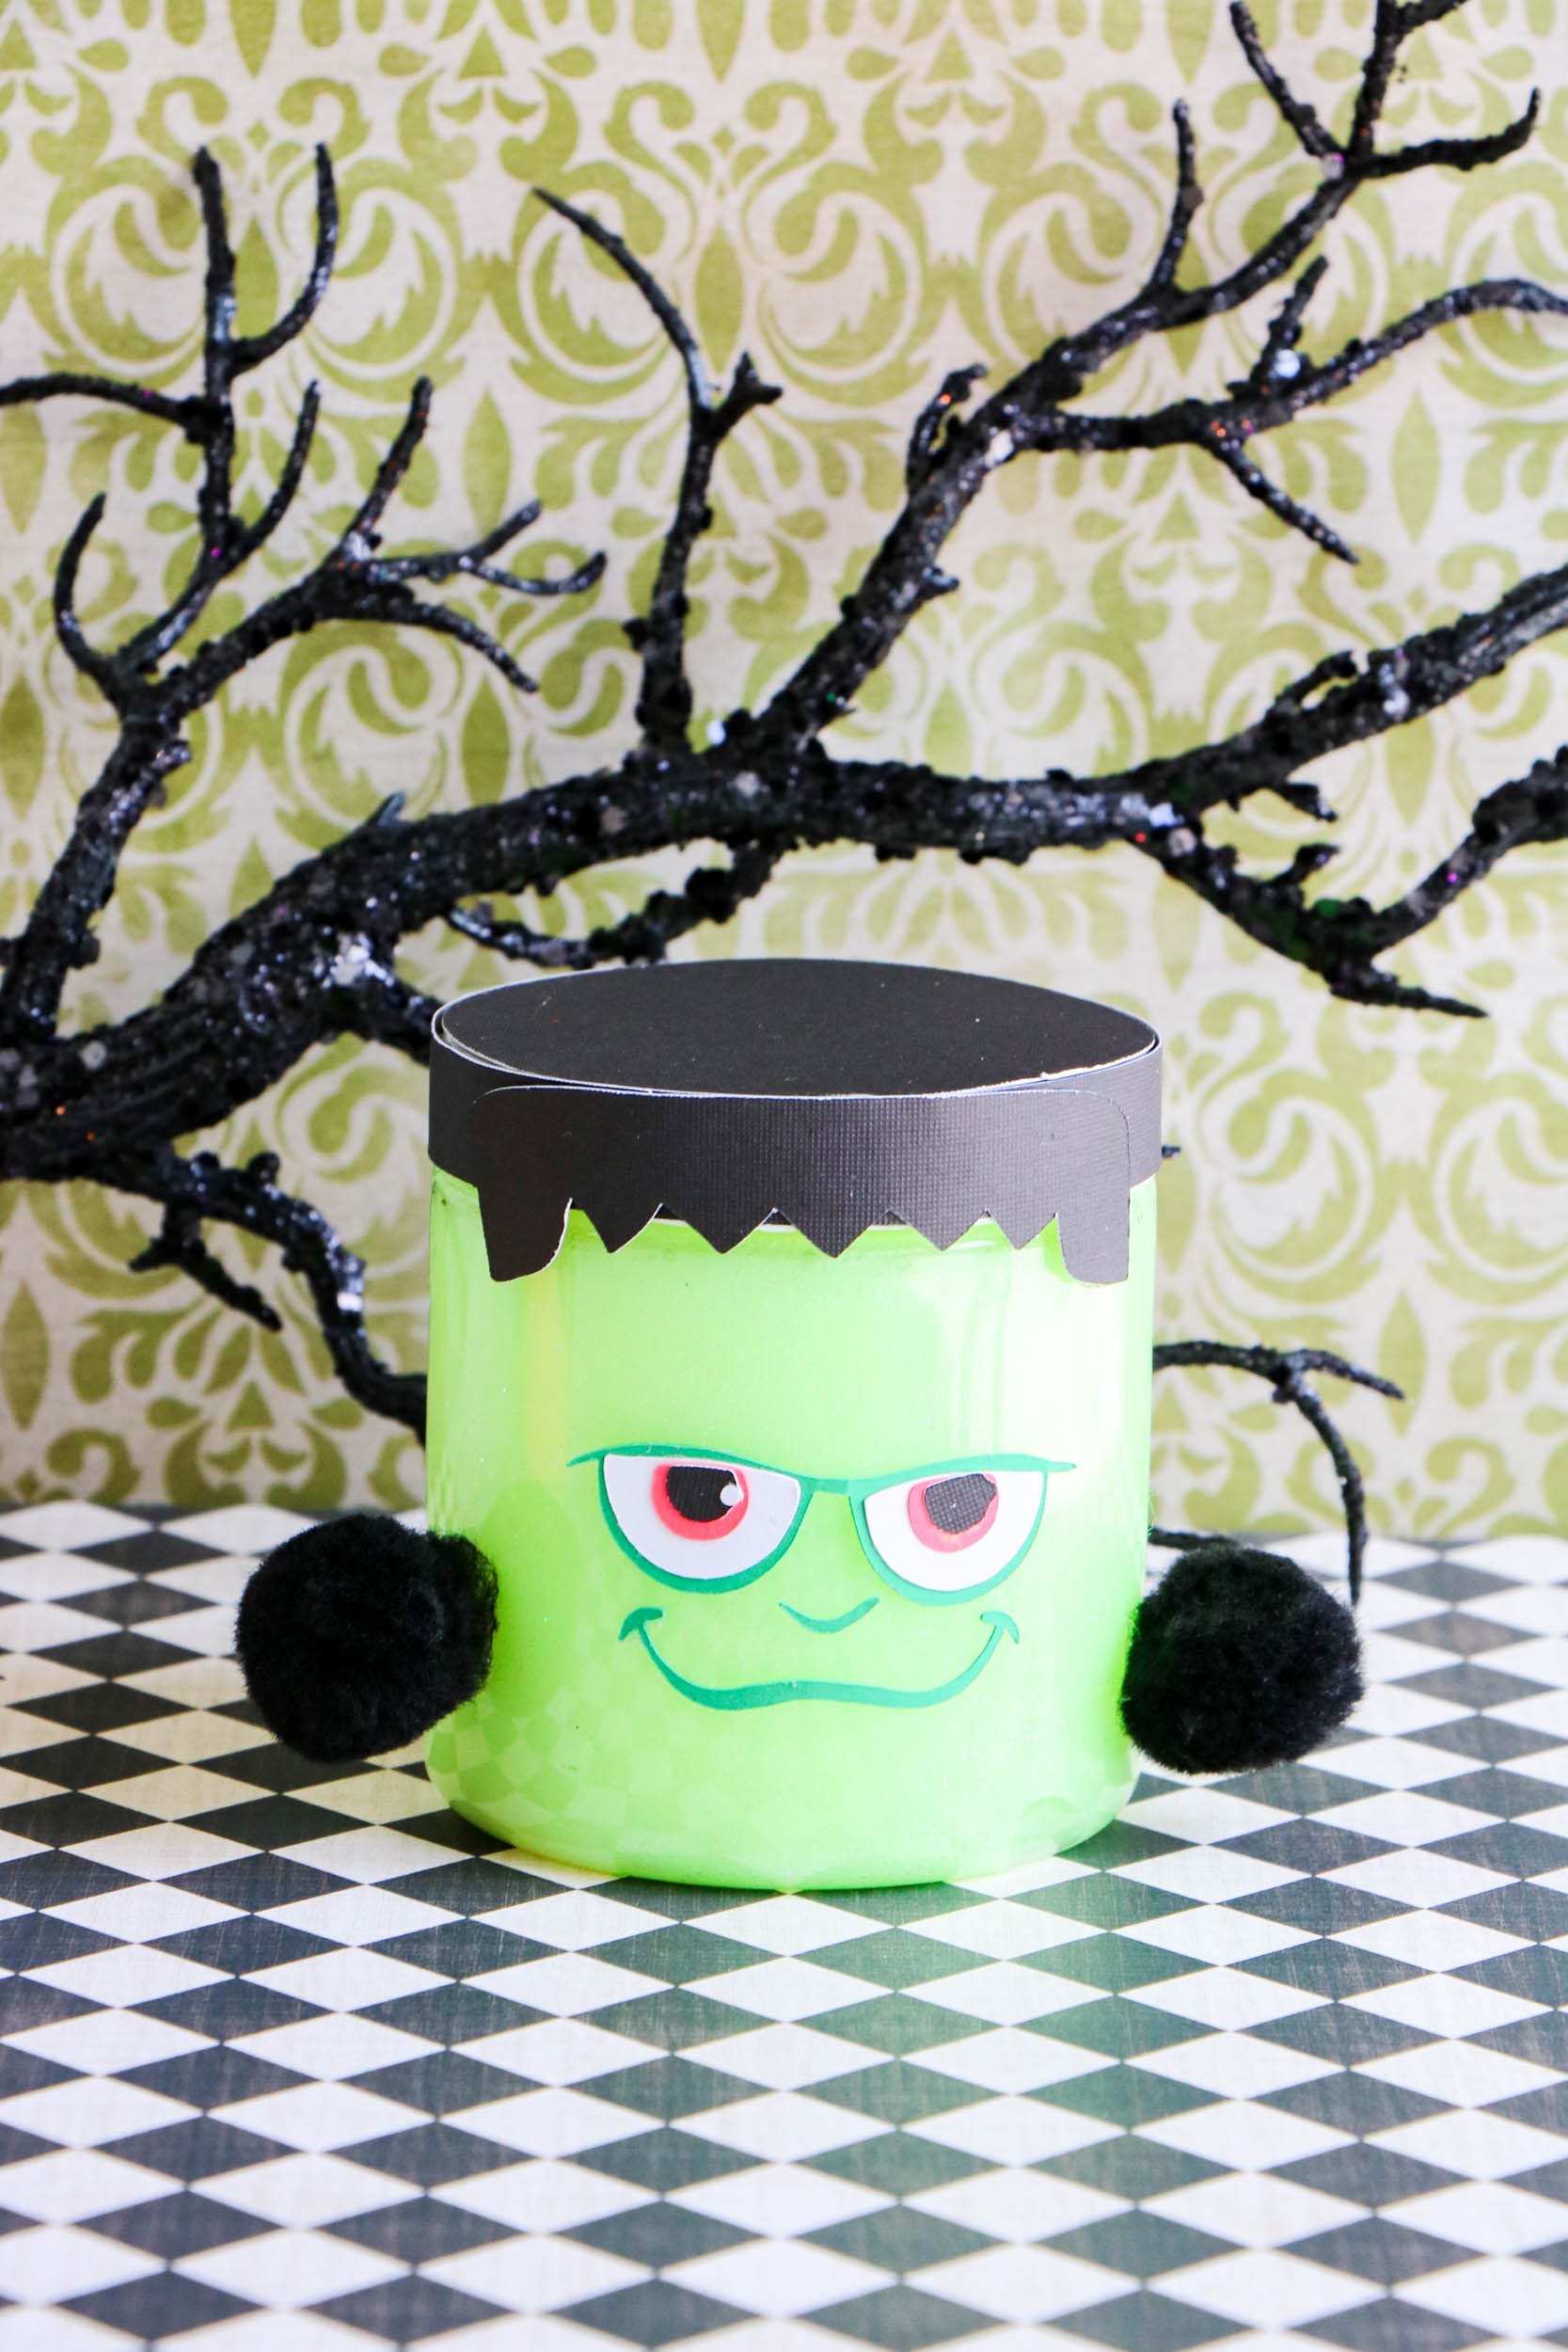 Making Frankenstein Glow in the Dark Slime is a fun Halloween activity to do with kids. This Halloween slime requires few ingredients and is super fun to play with after dark. The perfect Halloween party activity for kids!